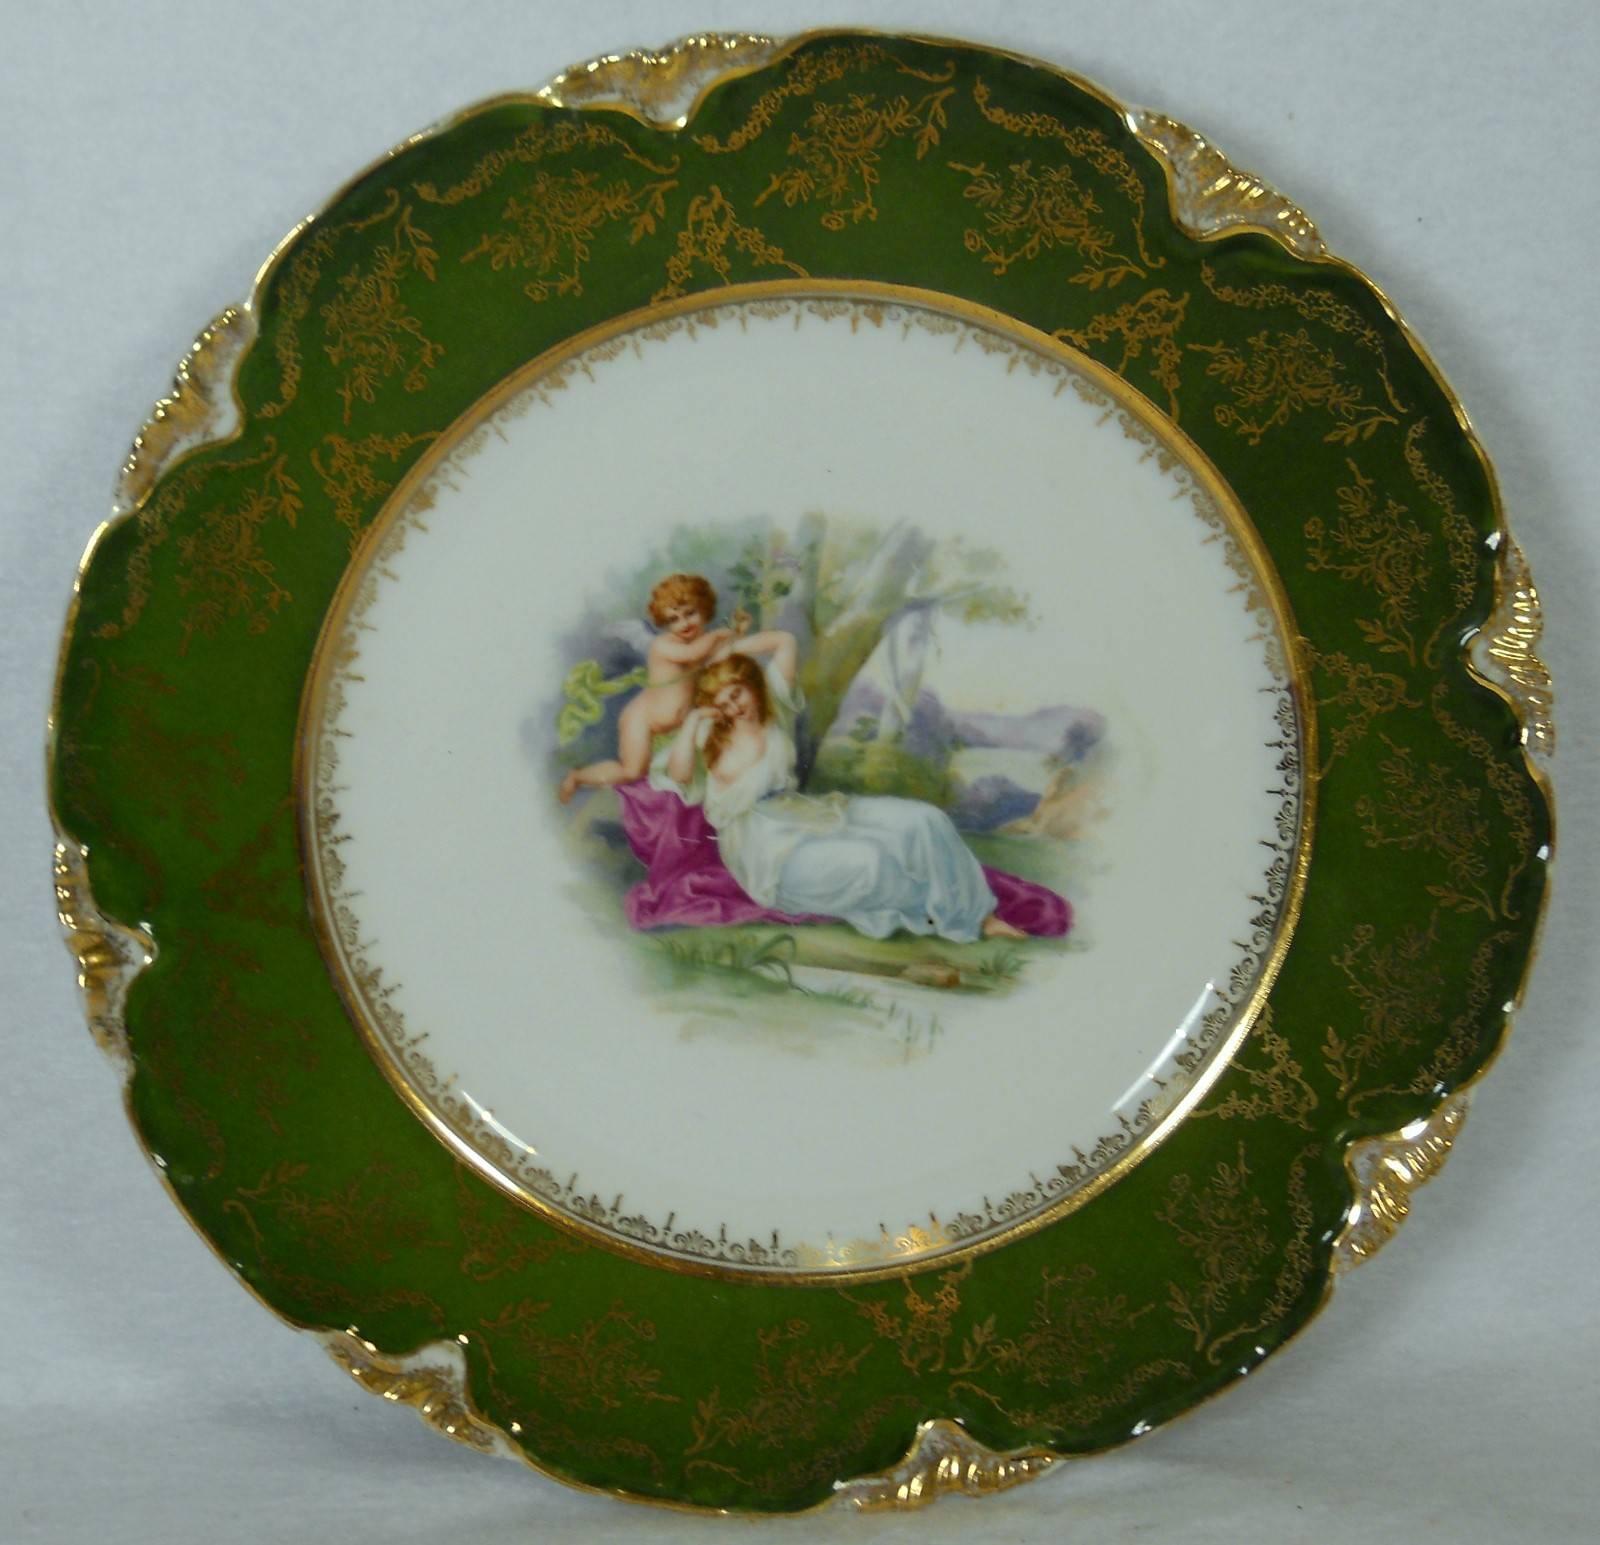 Lewis strauss & Sons Austria Classic scenes, women pattern set of twelve (12) dinner plates.

In great condition free from chips, cracks, break, stain, or discoloration. Some pieces show manor wear and or scratching.

Three sets of four